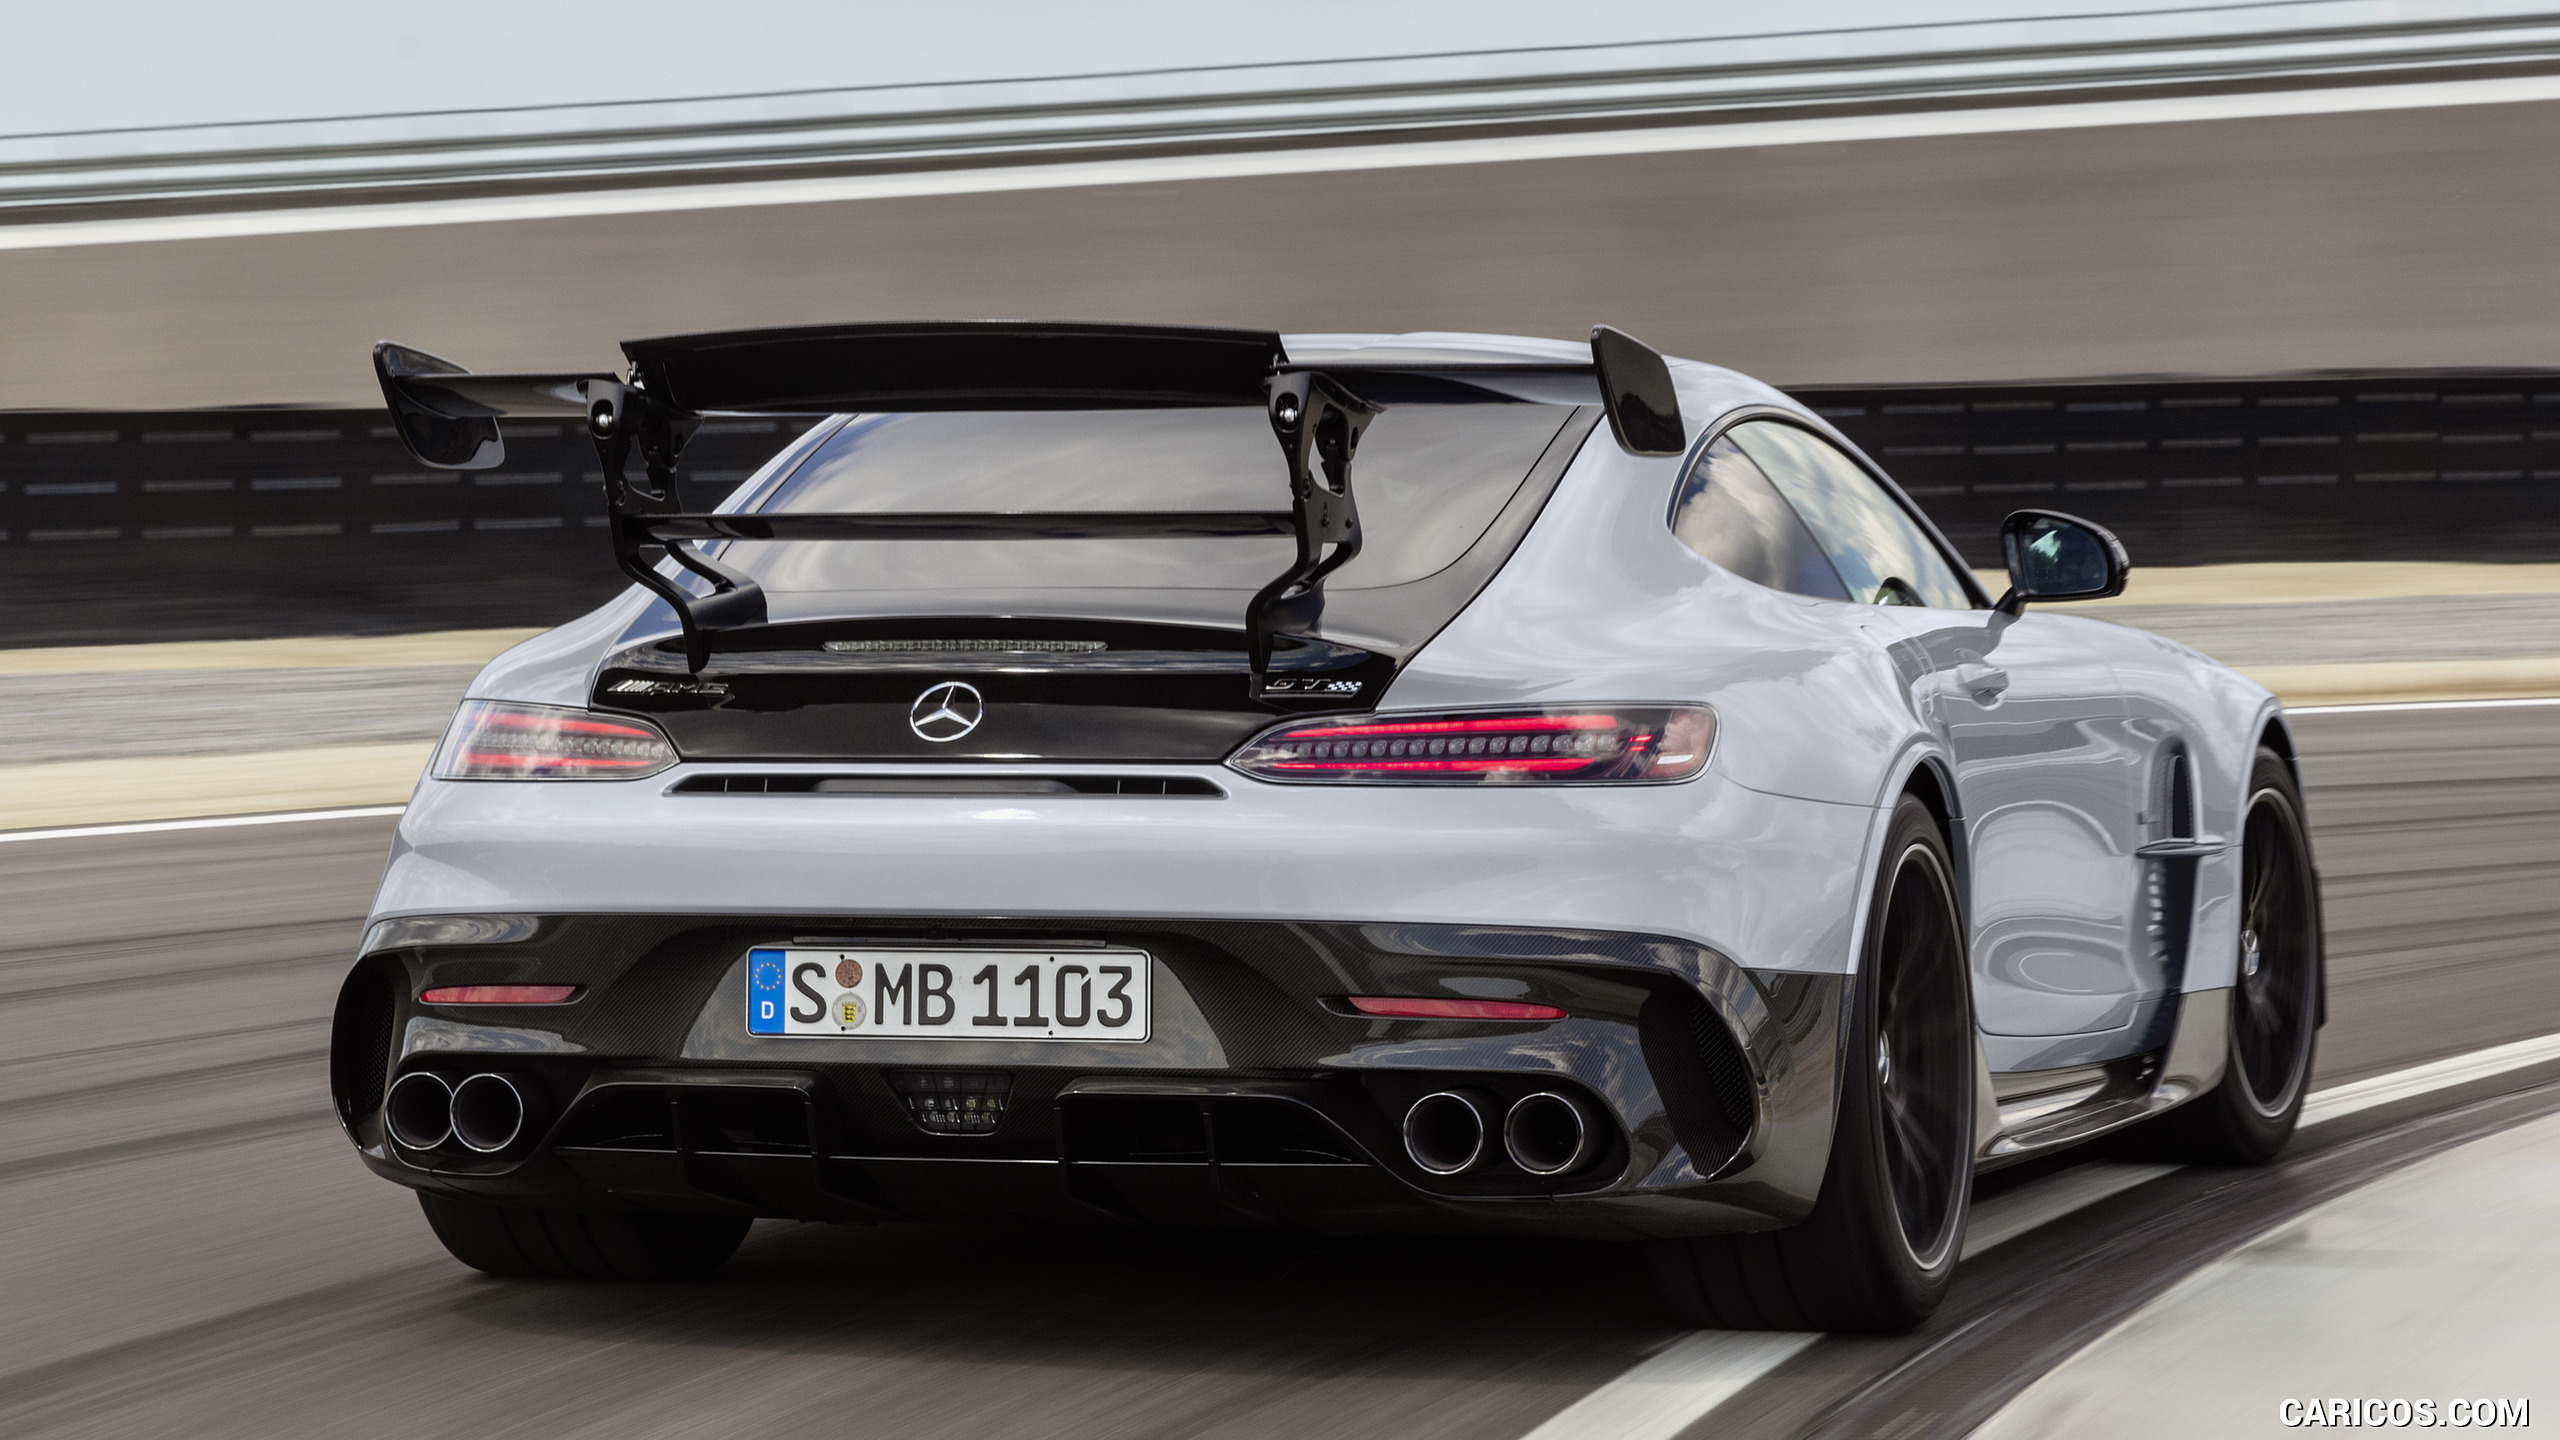 2021 Mercedes-AMG GT Black Series (Color: High Tech Silver) - Rear, #31 of 215